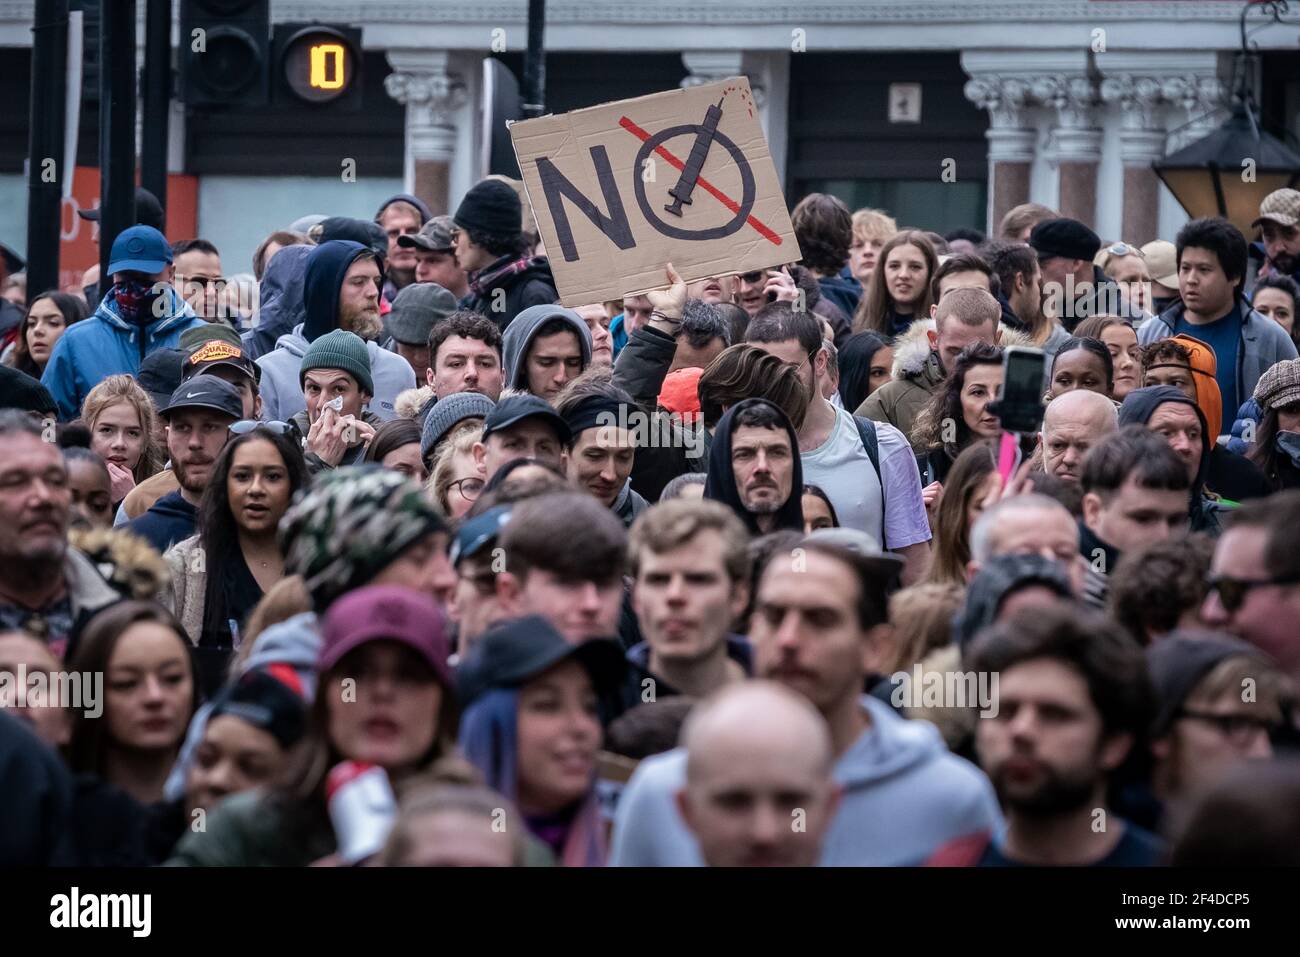 London, UK. 20th March, 2021. Coronavirus: Thousands of anti-lockdown demonstrators march under heavy police surveillance from Hyde Park to Westminster. Credit: Guy Corbishley/Alamy Live News Stock Photo